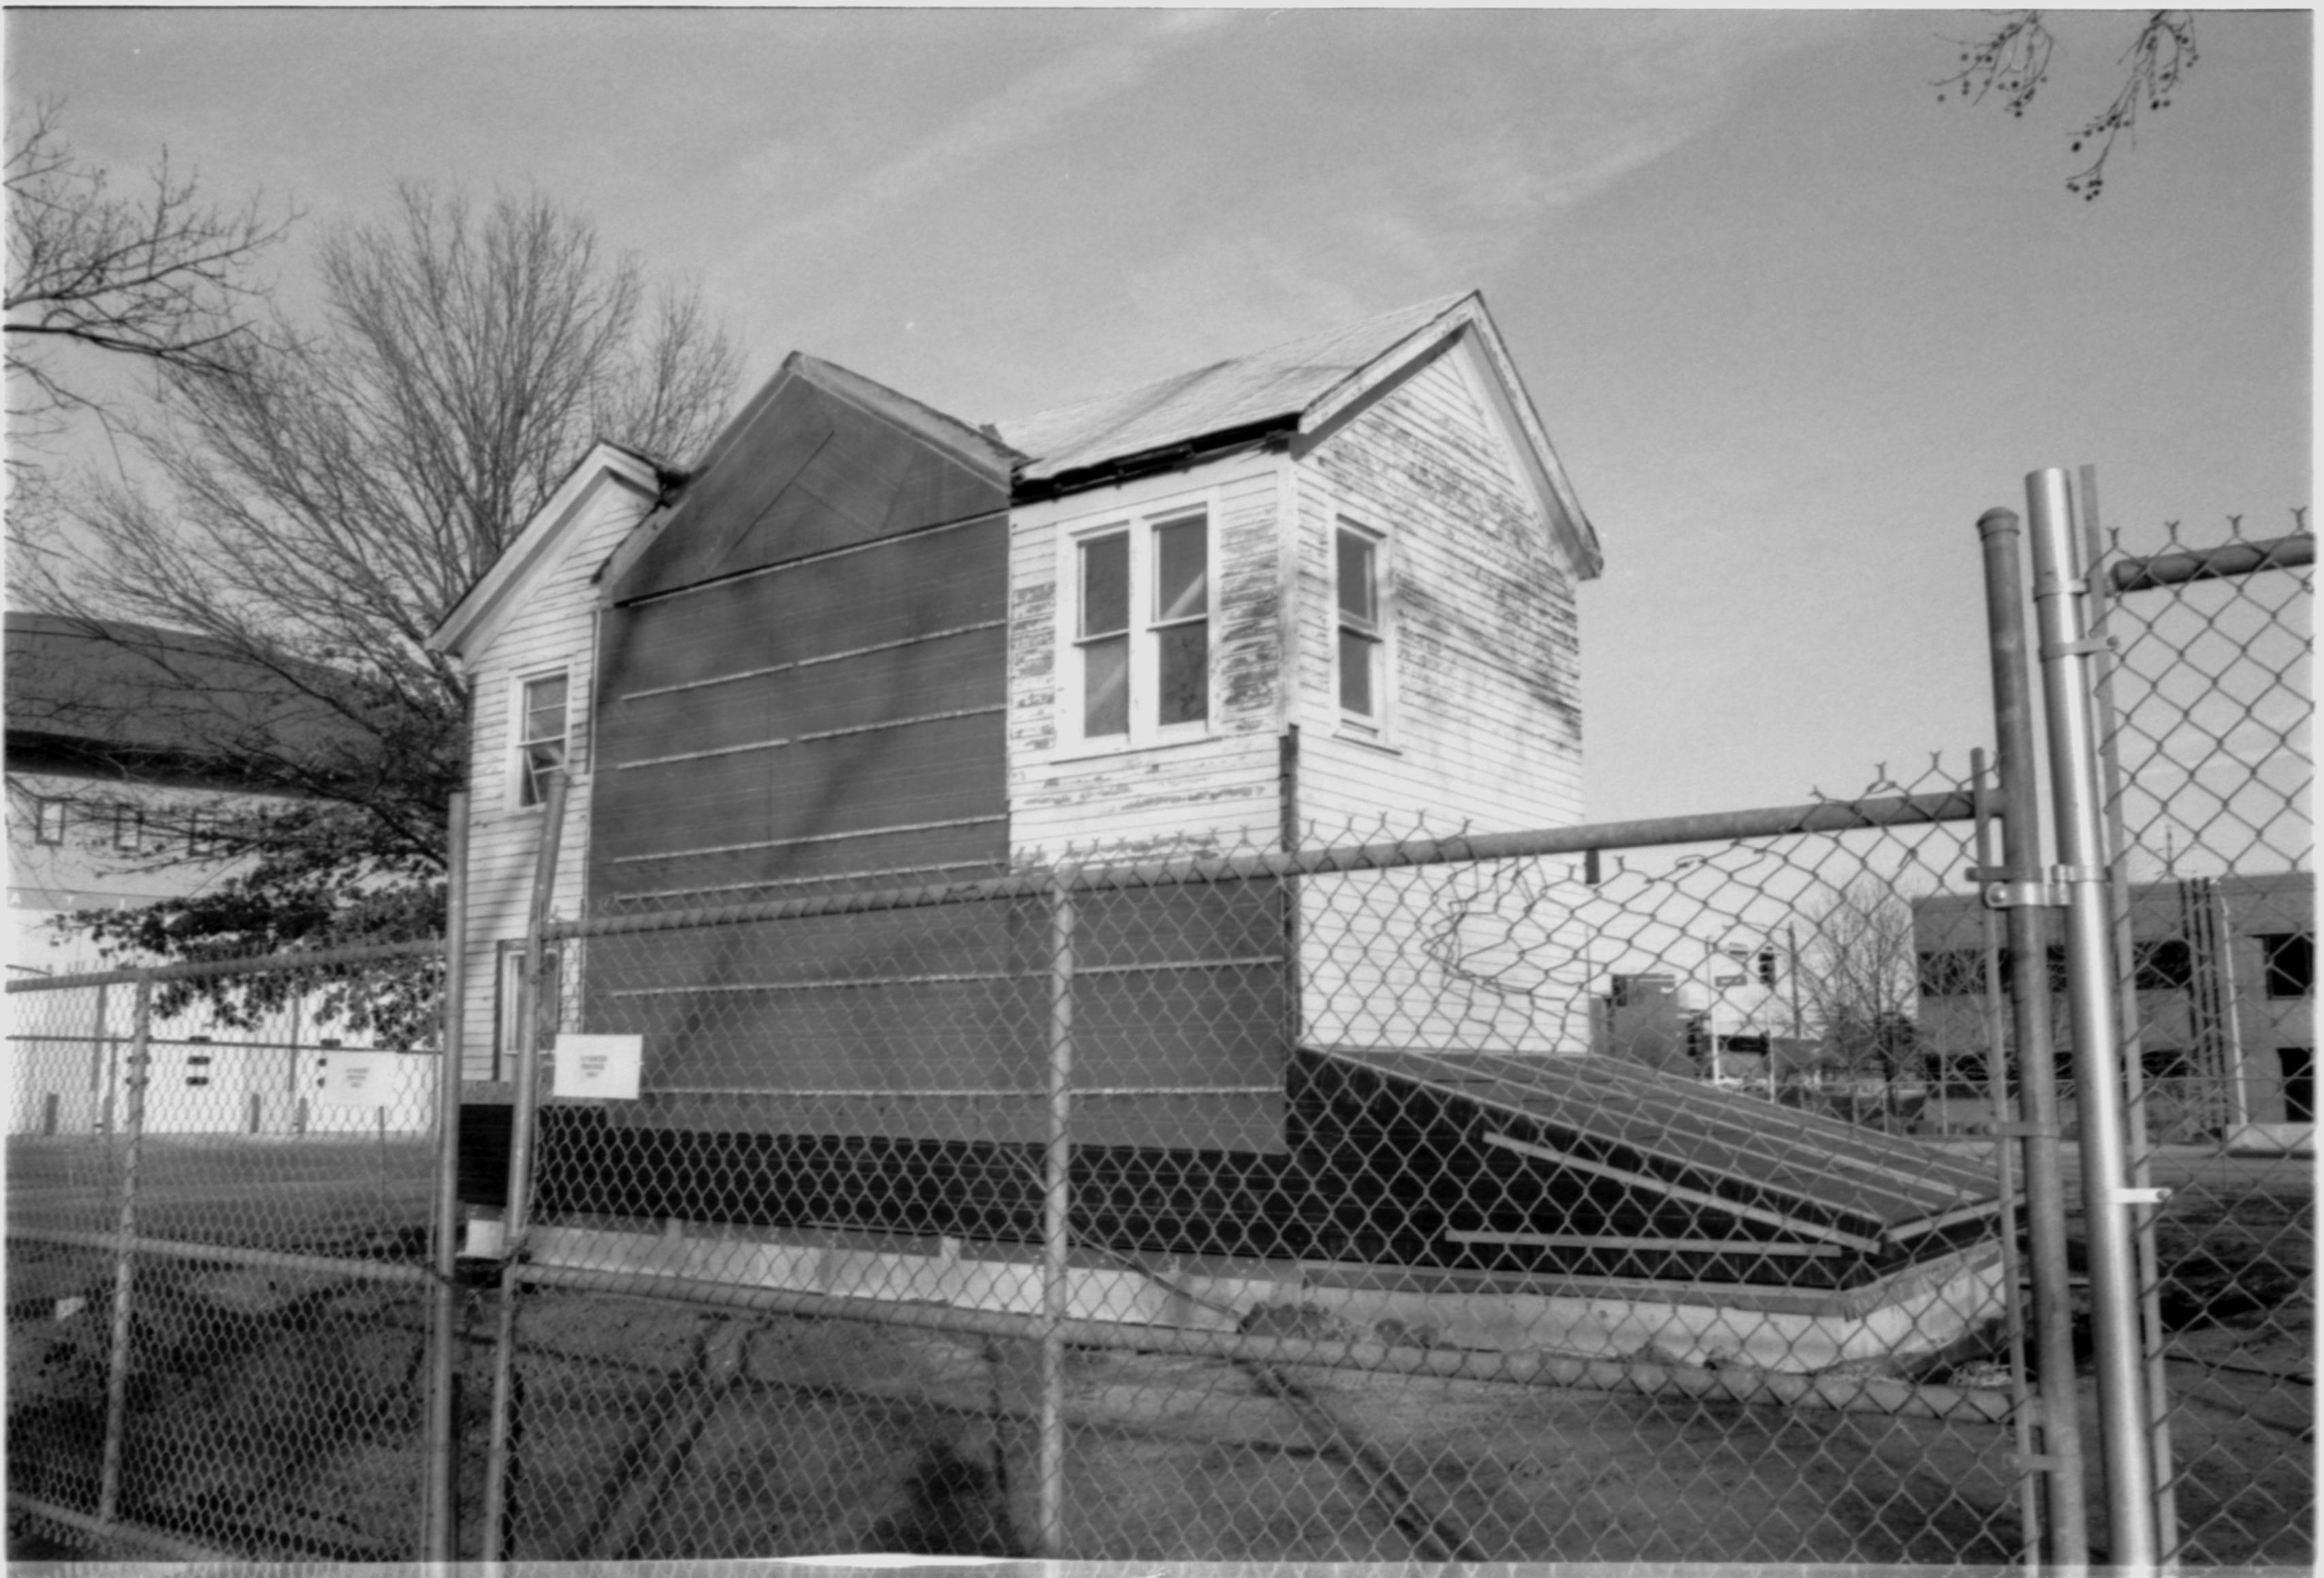 Morse - restoration, stabilization for winter. Chain link fence surround. Fire Station No. 1 in background left. Office buildings across 9th Street in background right. Looking Northeast from alley by Morse lot (Block 10, Lots 15-16) Morse, restoration, stabilization, Fire Station No. 1, 9th Street